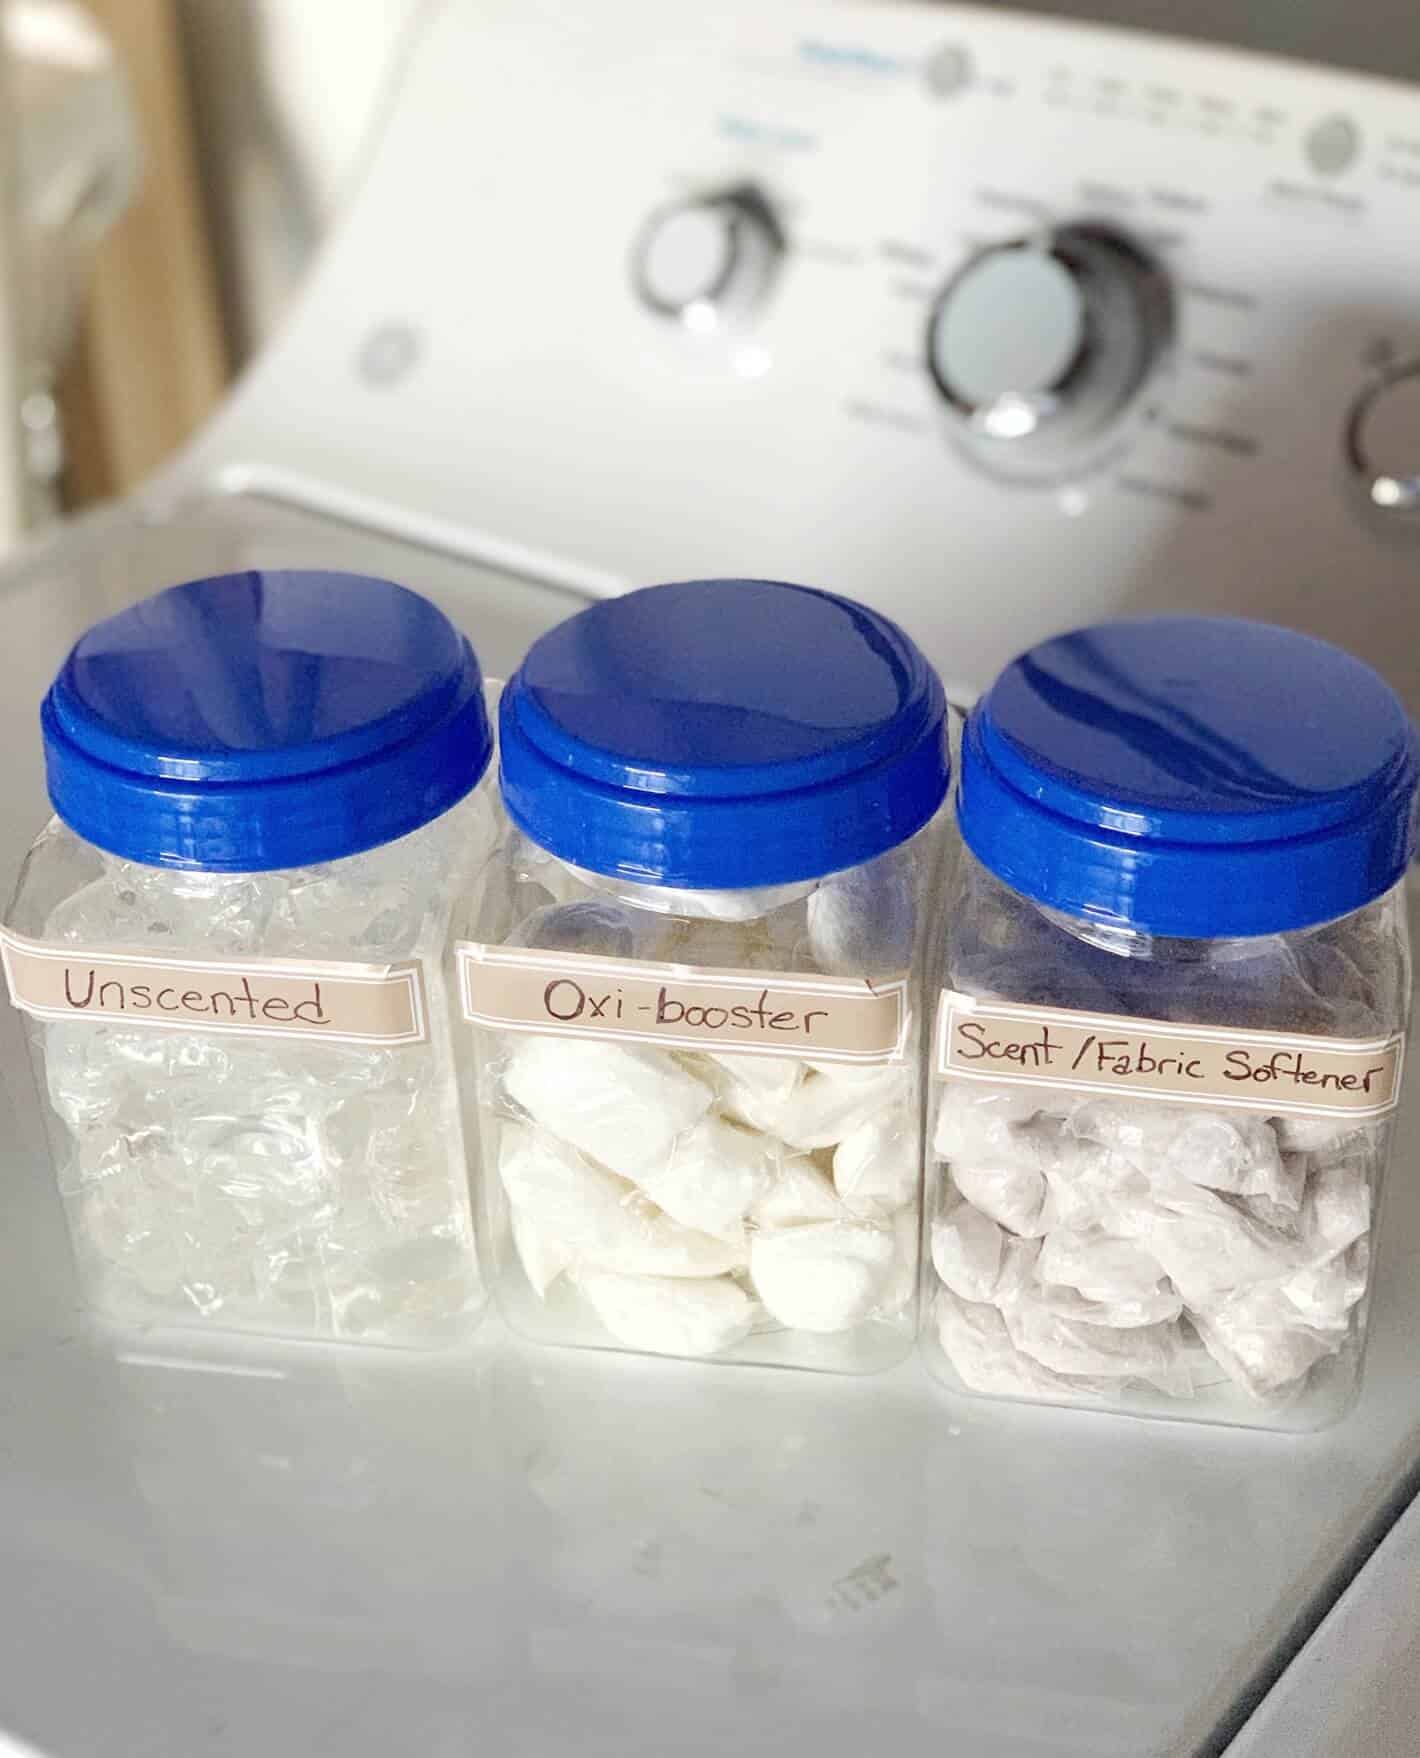 Dropps pods stored in 3 separate clear containers from the dollar store. One is labeled unscented, one is labeled oxi-booster, and one is labeled scented fabric softener. 